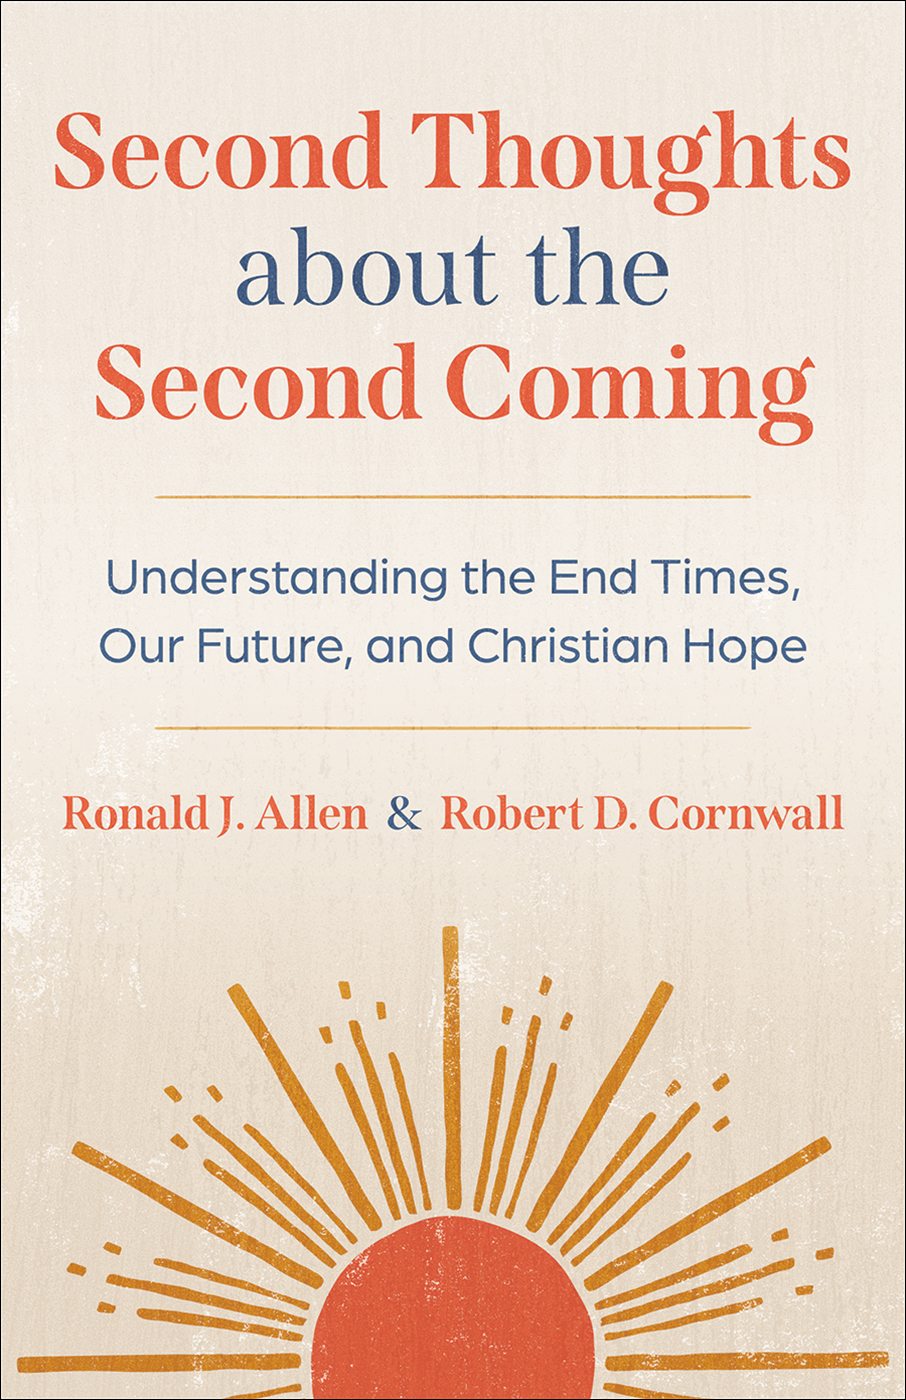 Second Thoughts about the Second Coming